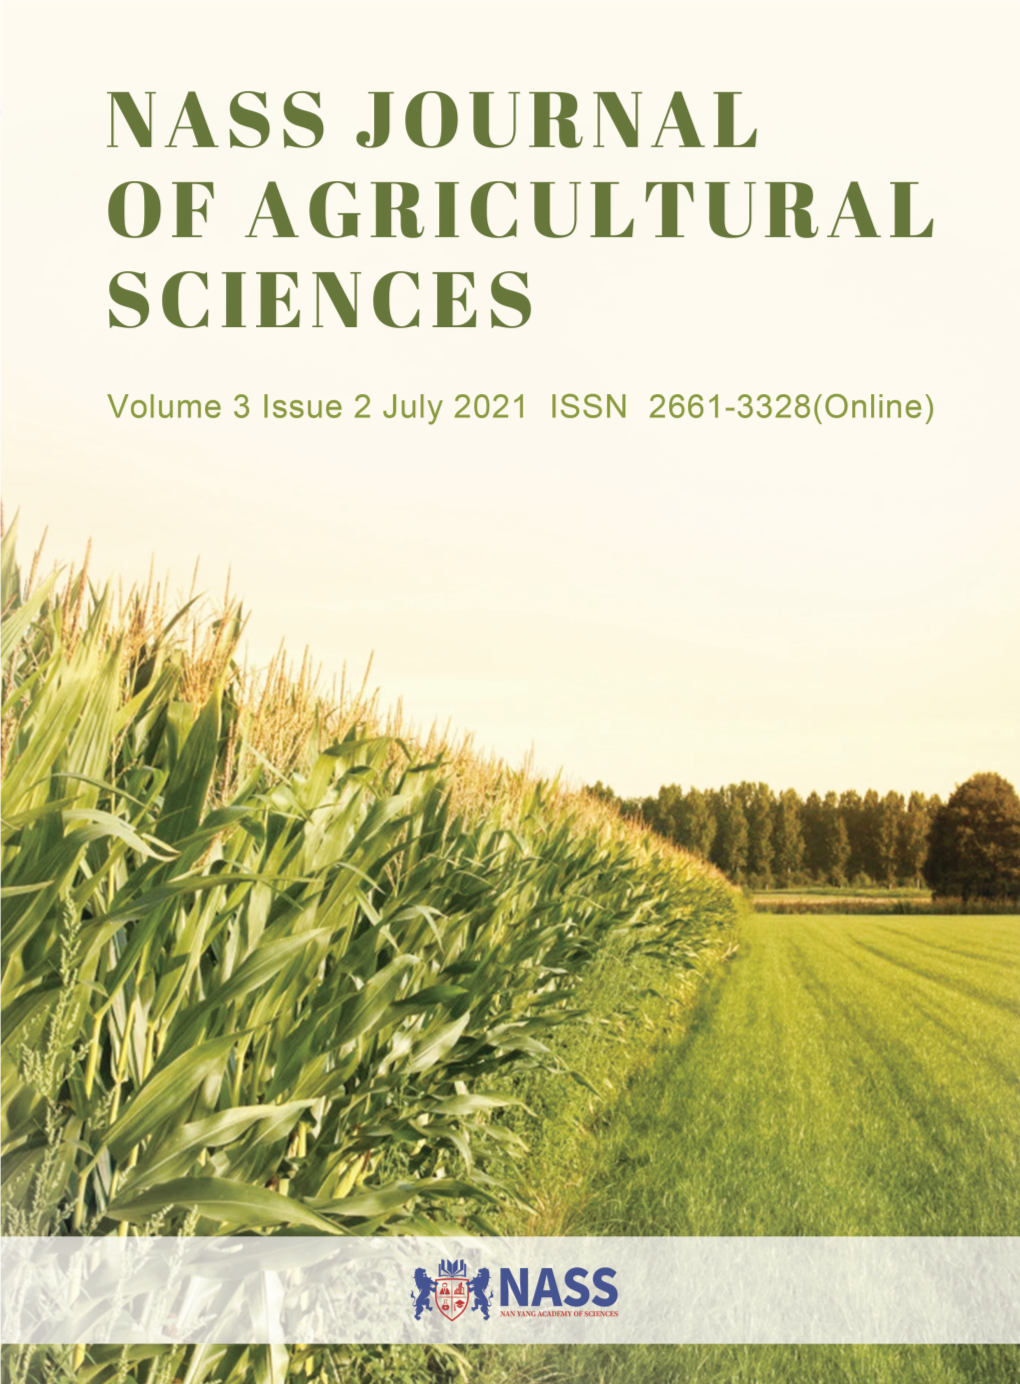 NASS Journal of Agricultural Sciences Contents ARTICLE